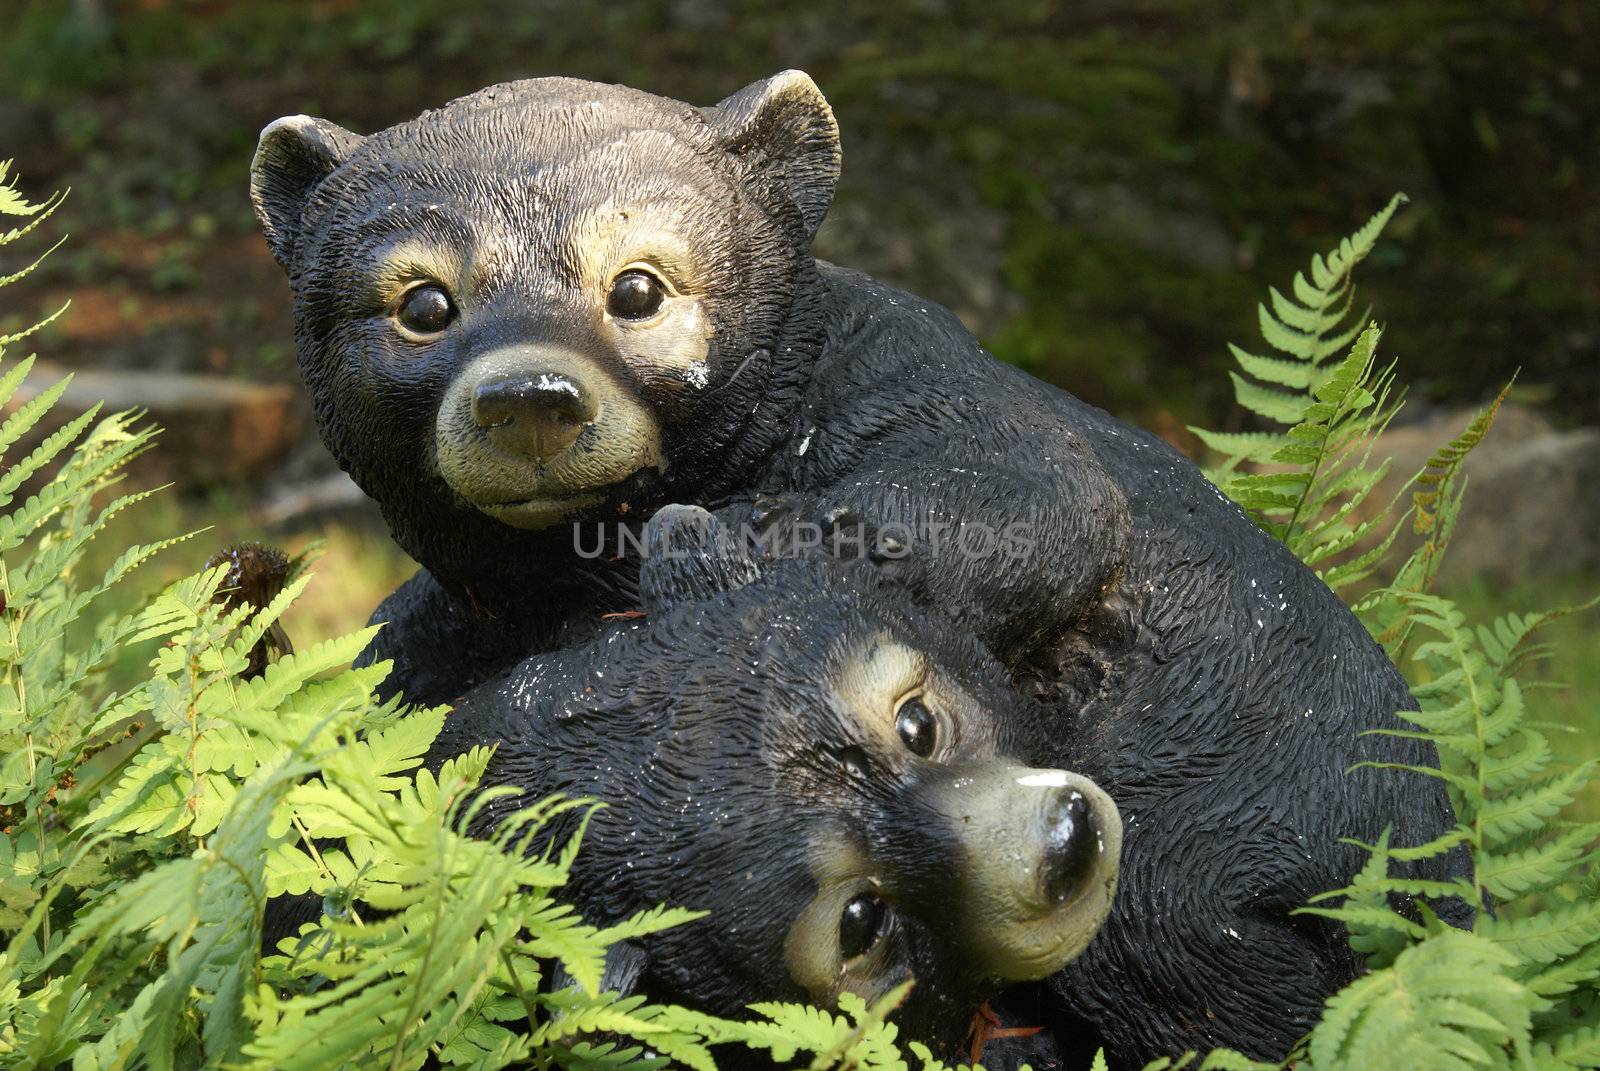 A bear cub statue in amongst some foliage.